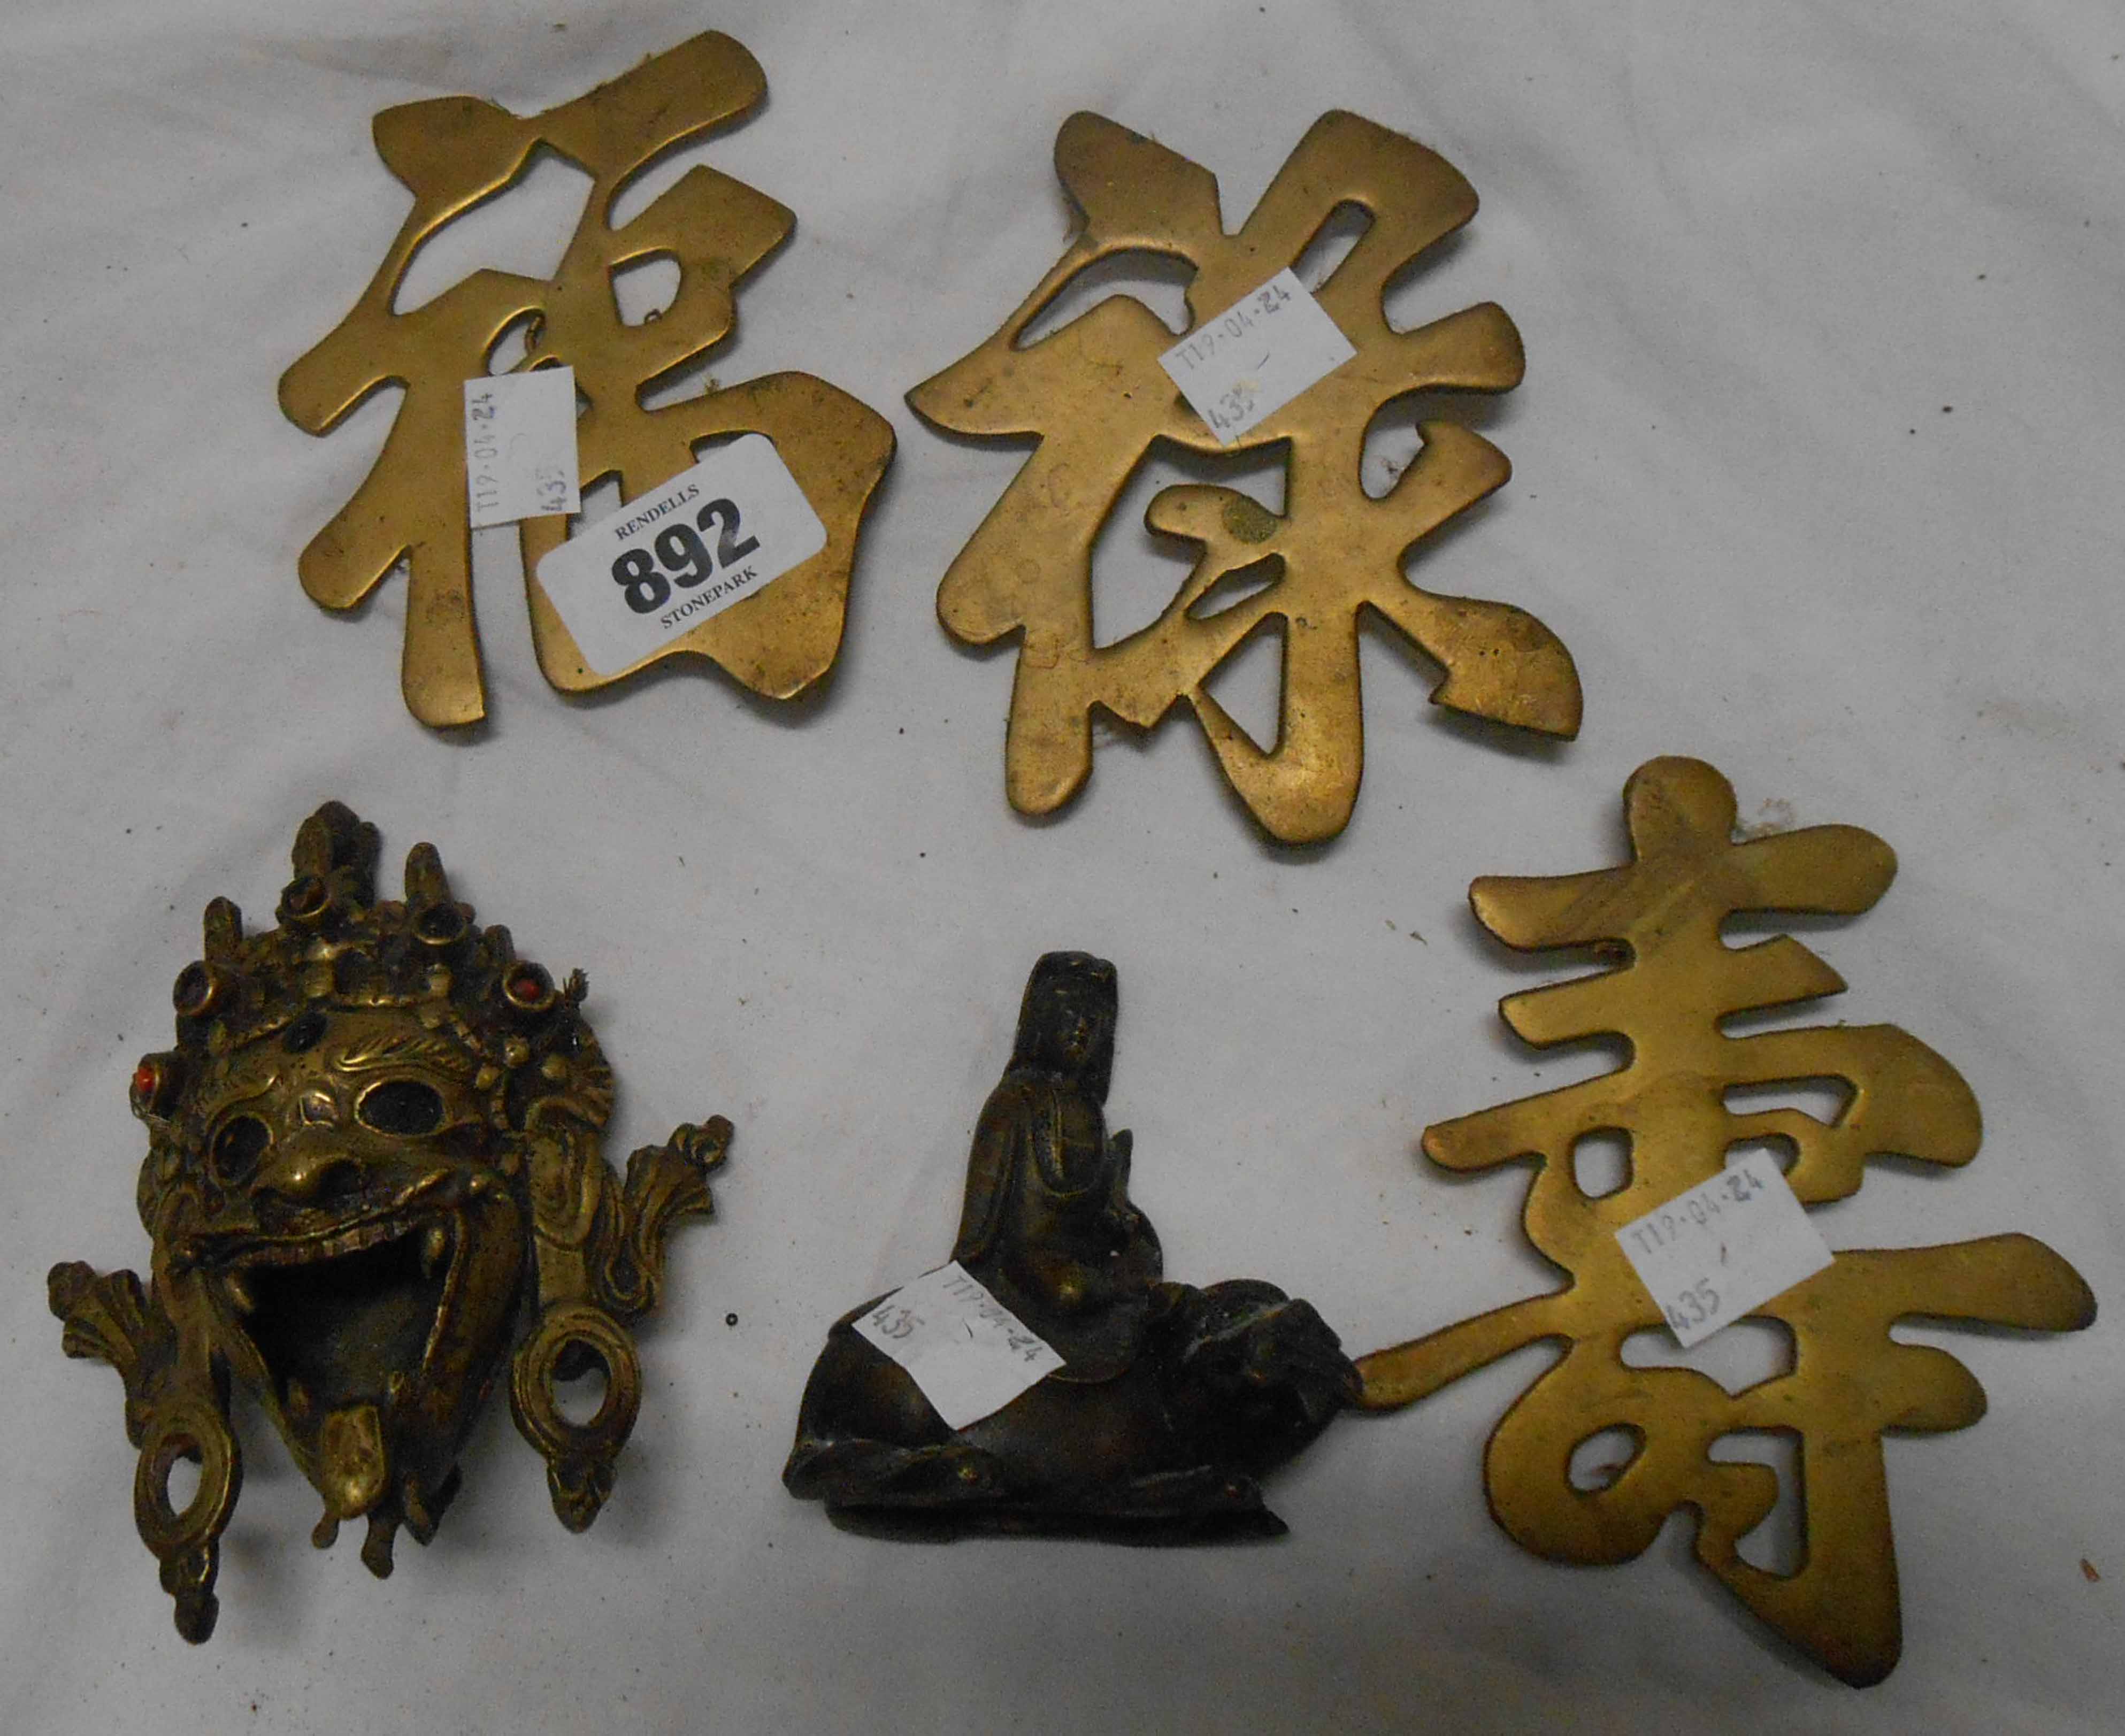 Three Taiwanese auspicious characters, depicting good luck, prosperity and long life - sold with two